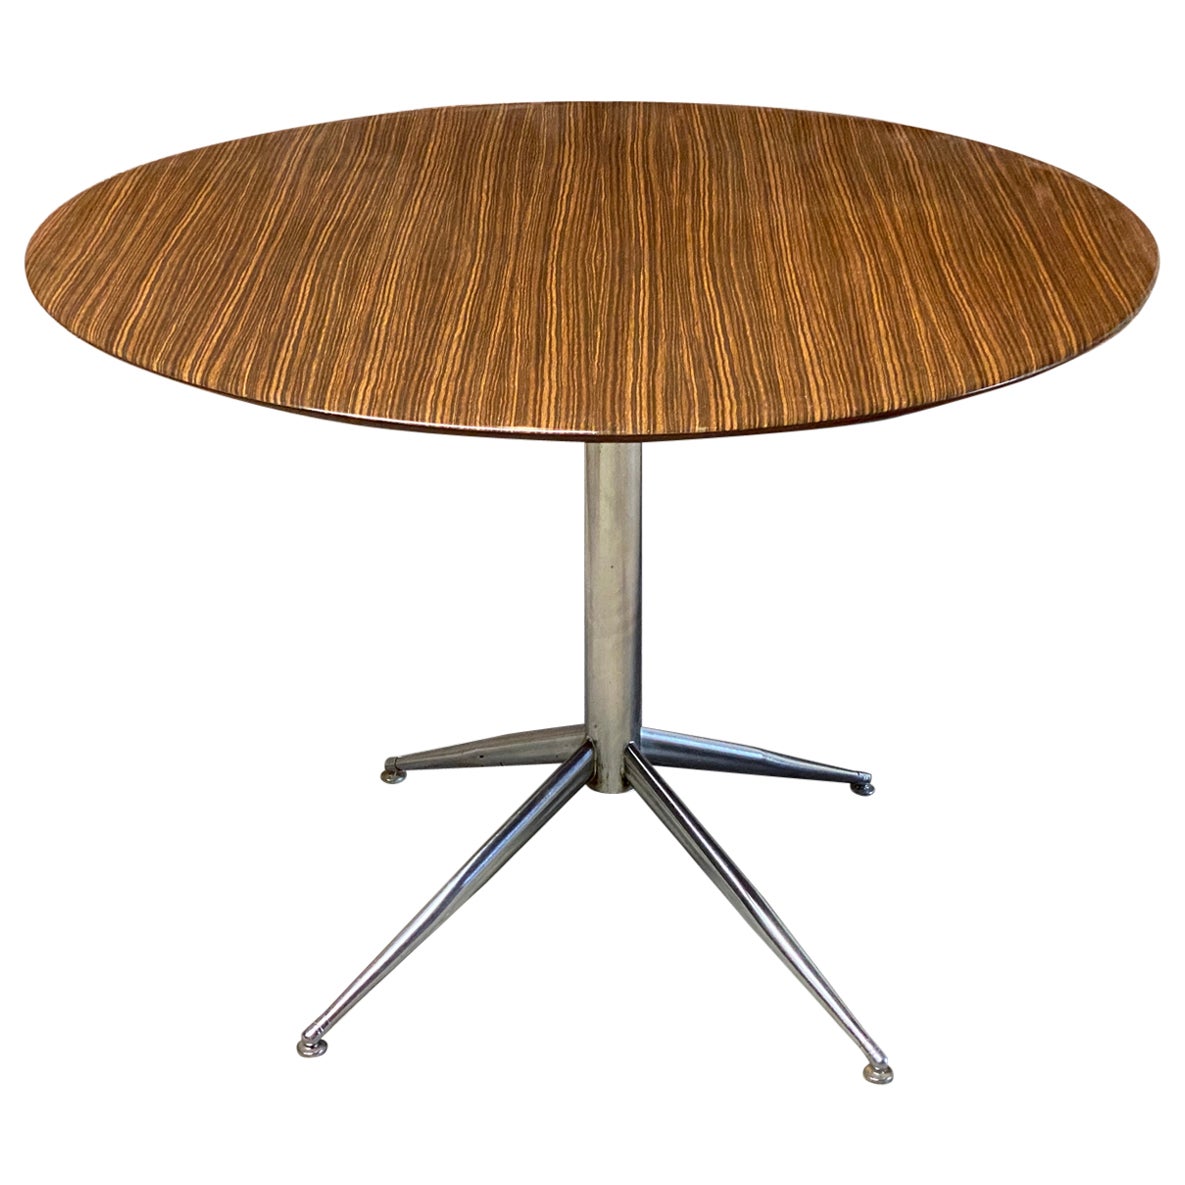 Zebrawood Laminate Round Dining Table For Sale